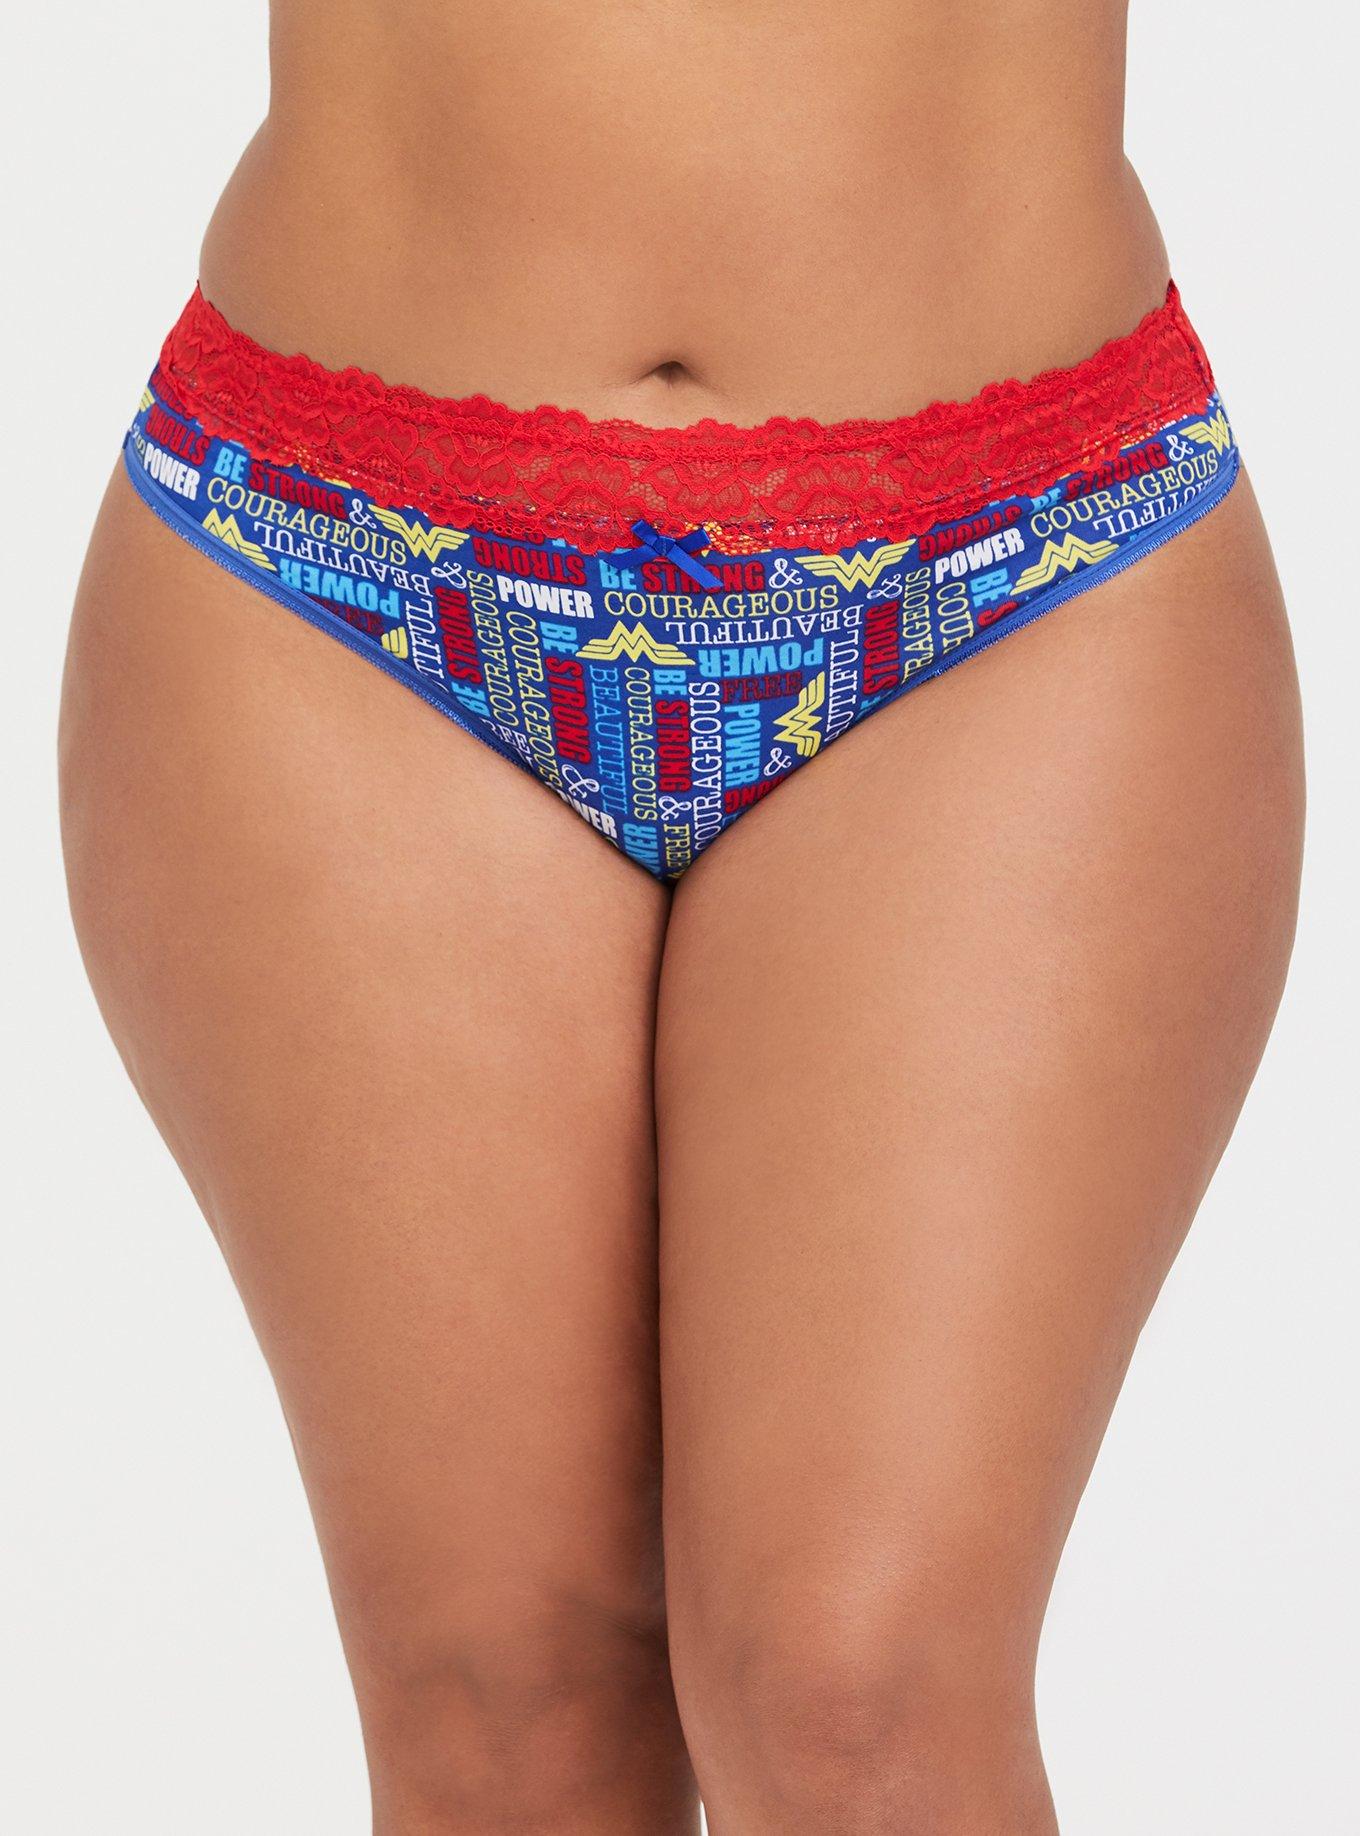 Plus Size WONDER WOMAN Torrid Panties Size 2 Retails US 16.90 READ ALL  FIRST /Waist 40 to 60 cm, Women's Fashion, New Undergarments & Loungewear  on Carousell